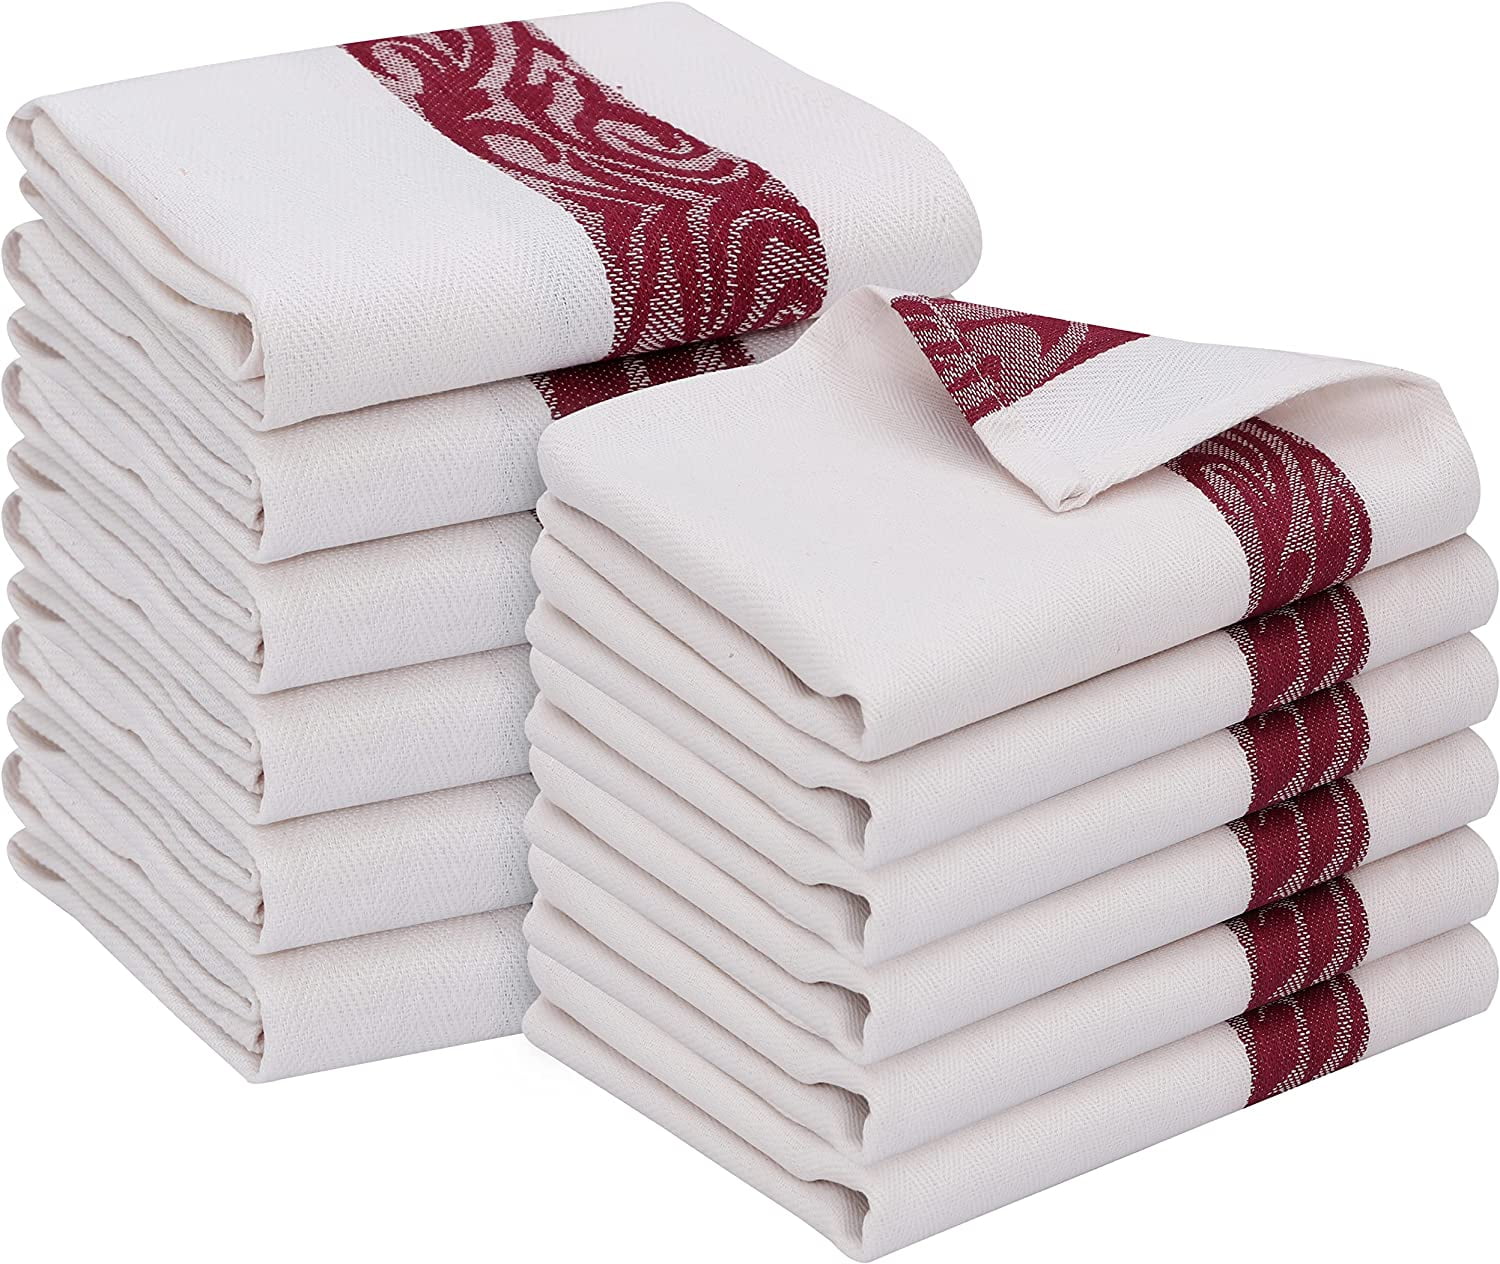 Reusable PaperLESS Tea Towels 1 Ply 12-12x15 Cleaning Dishcloths